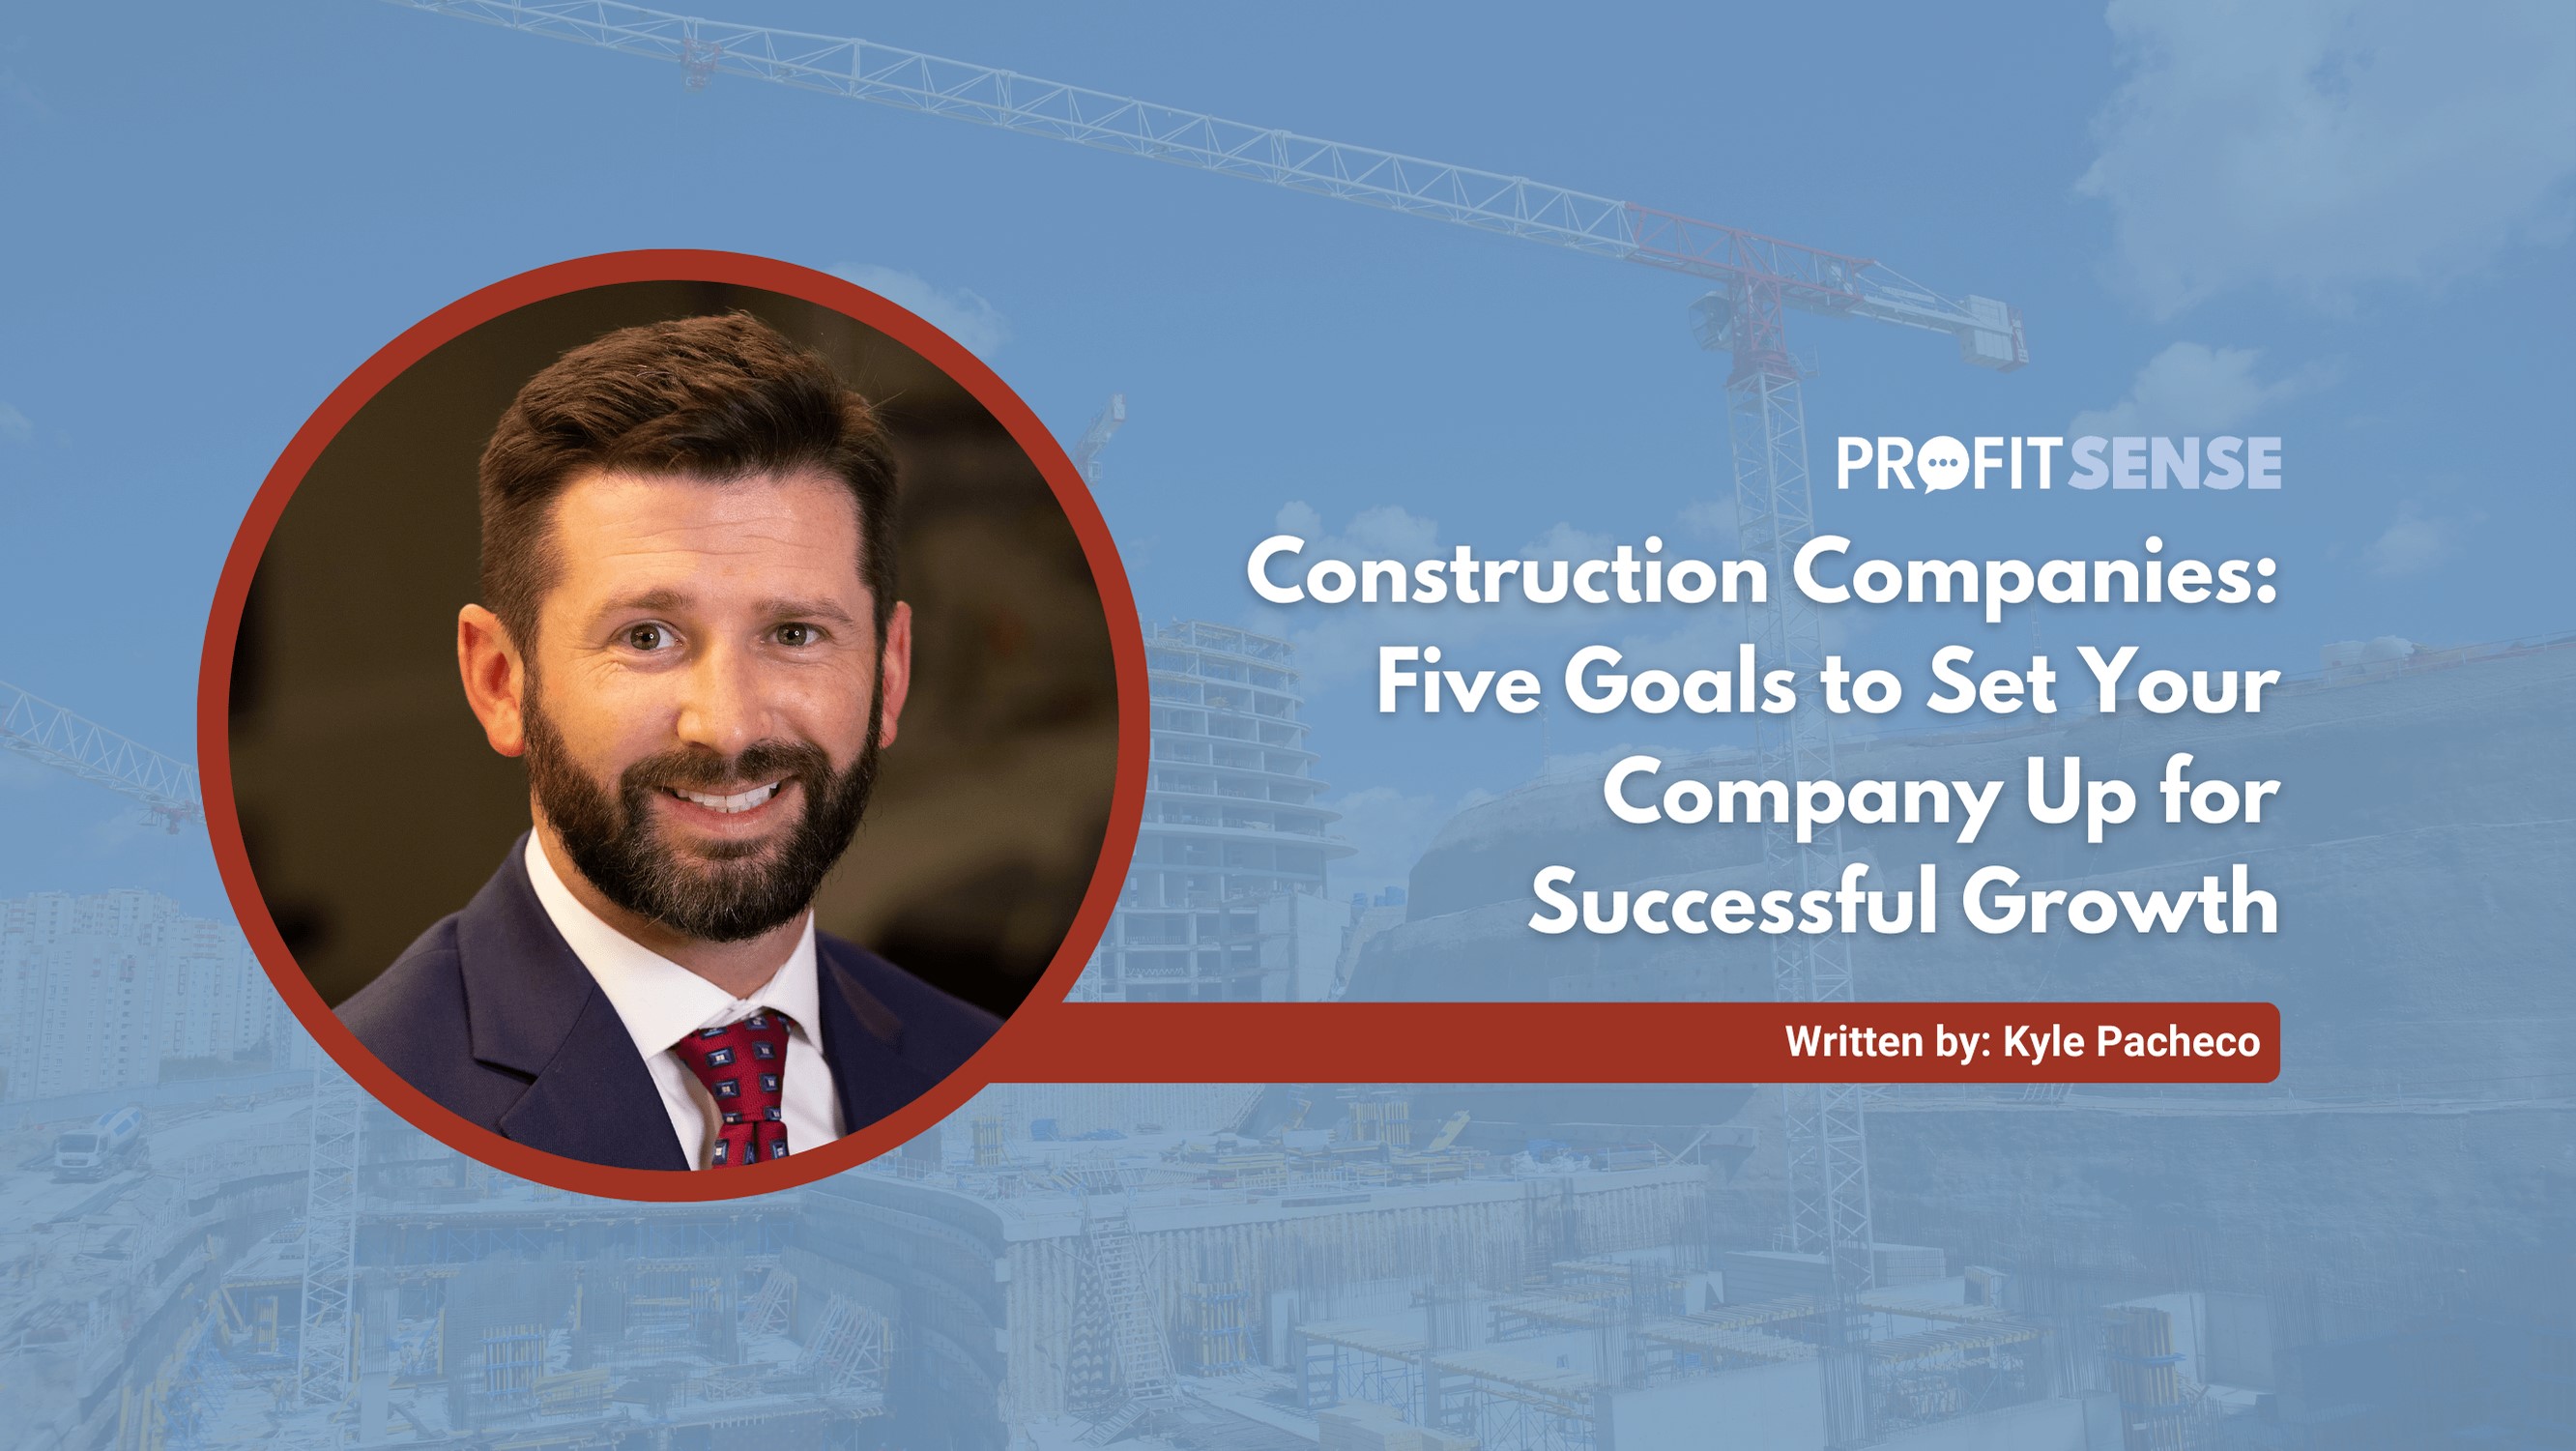 Construction Companies: Five Goals to Set Your Company Up for Successful Growth